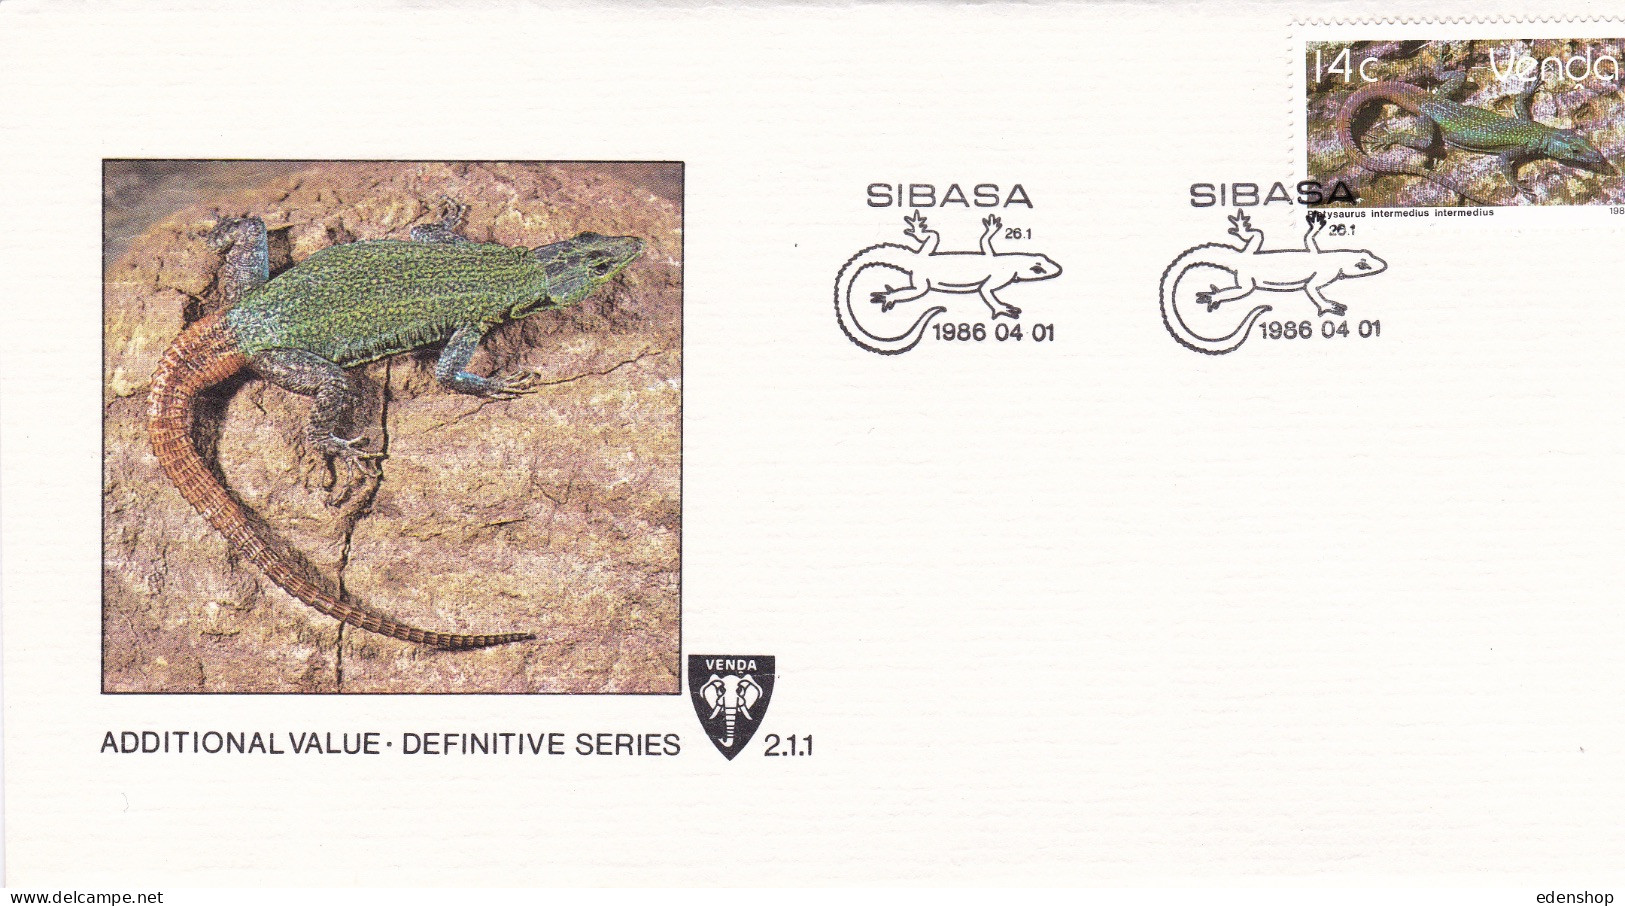 1985 VENDA SOUTH AFRICA VENDA  ALL ISSUES Birds, Writing, Fruit, Ferns, MNH Stamps, Control Blocks,FDCs,First Day sheets